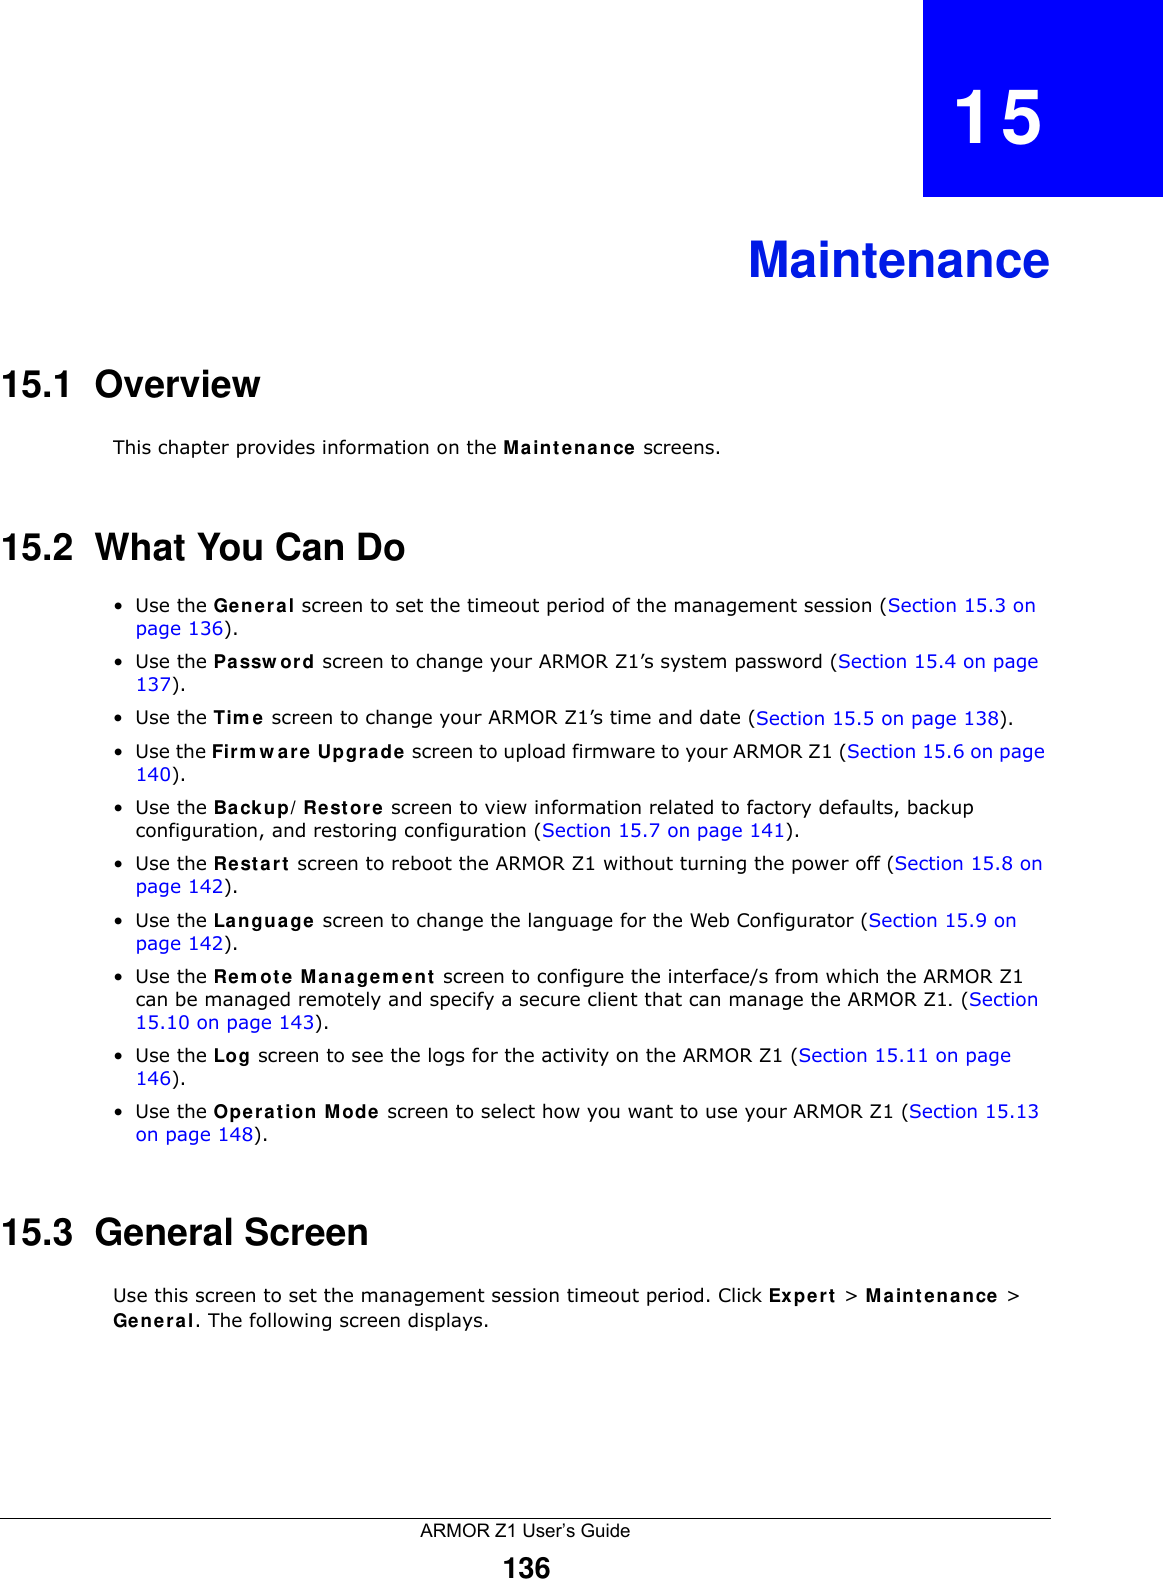 ARMOR Z1 User’s Guide136CHAPTER   15Maintenance15.1  OverviewThis chapter provides information on the Maintenance screens. 15.2  What You Can Do•Use the General screen to set the timeout period of the management session (Section 15.3 on page 136). •Use the Password screen to change your ARMOR Z1’s system password (Section 15.4 on page 137).•Use the Time screen to change your ARMOR Z1’s time and date (Section 15.5 on page 138).•Use the Firmware Upgrade screen to upload firmware to your ARMOR Z1 (Section 15.6 on page 140).•Use the Backup/Restore screen to view information related to factory defaults, backup configuration, and restoring configuration (Section 15.7 on page 141).•Use the Restart screen to reboot the ARMOR Z1 without turning the power off (Section 15.8 on page 142).•Use the Language screen to change the language for the Web Configurator (Section 15.9 on page 142).•Use the Remote Management screen to configure the interface/s from which the ARMOR Z1 can be managed remotely and specify a secure client that can manage the ARMOR Z1. (Section 15.10 on page 143).•Use the Log screen to see the logs for the activity on the ARMOR Z1 (Section 15.11 on page 146).•Use the Operation Mode screen to select how you want to use your ARMOR Z1 (Section 15.13 on page 148). 15.3  General Screen Use this screen to set the management session timeout period. Click Expert &gt; Maintenance &gt; General. The following screen displays.